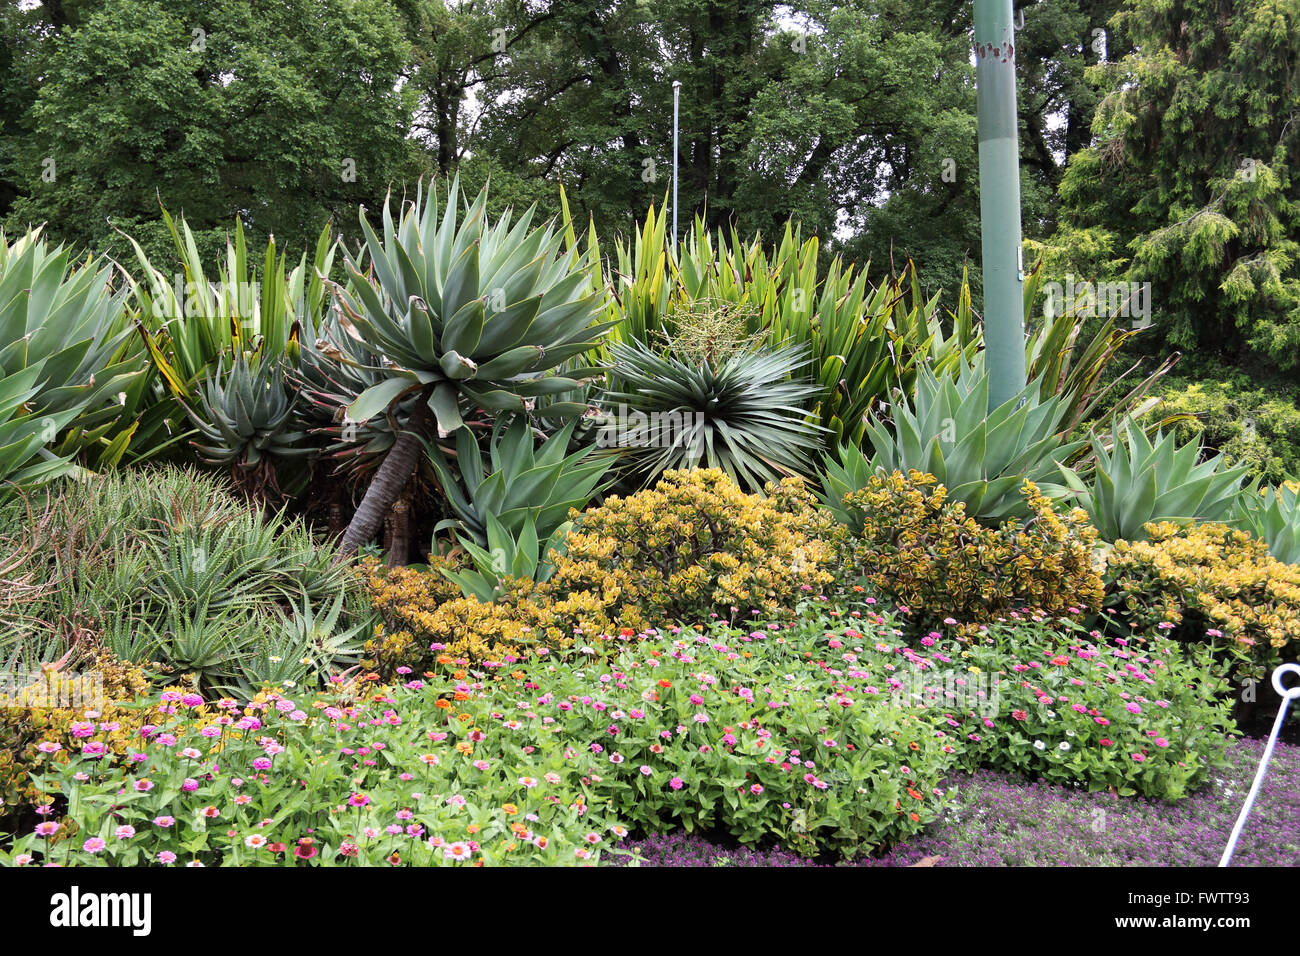 Group of desert plants like Agave, ALoe vera, Native Gymea Lily and Jade plant at Fitzroy Garden Melbourne Victoria Australia Stock Photo